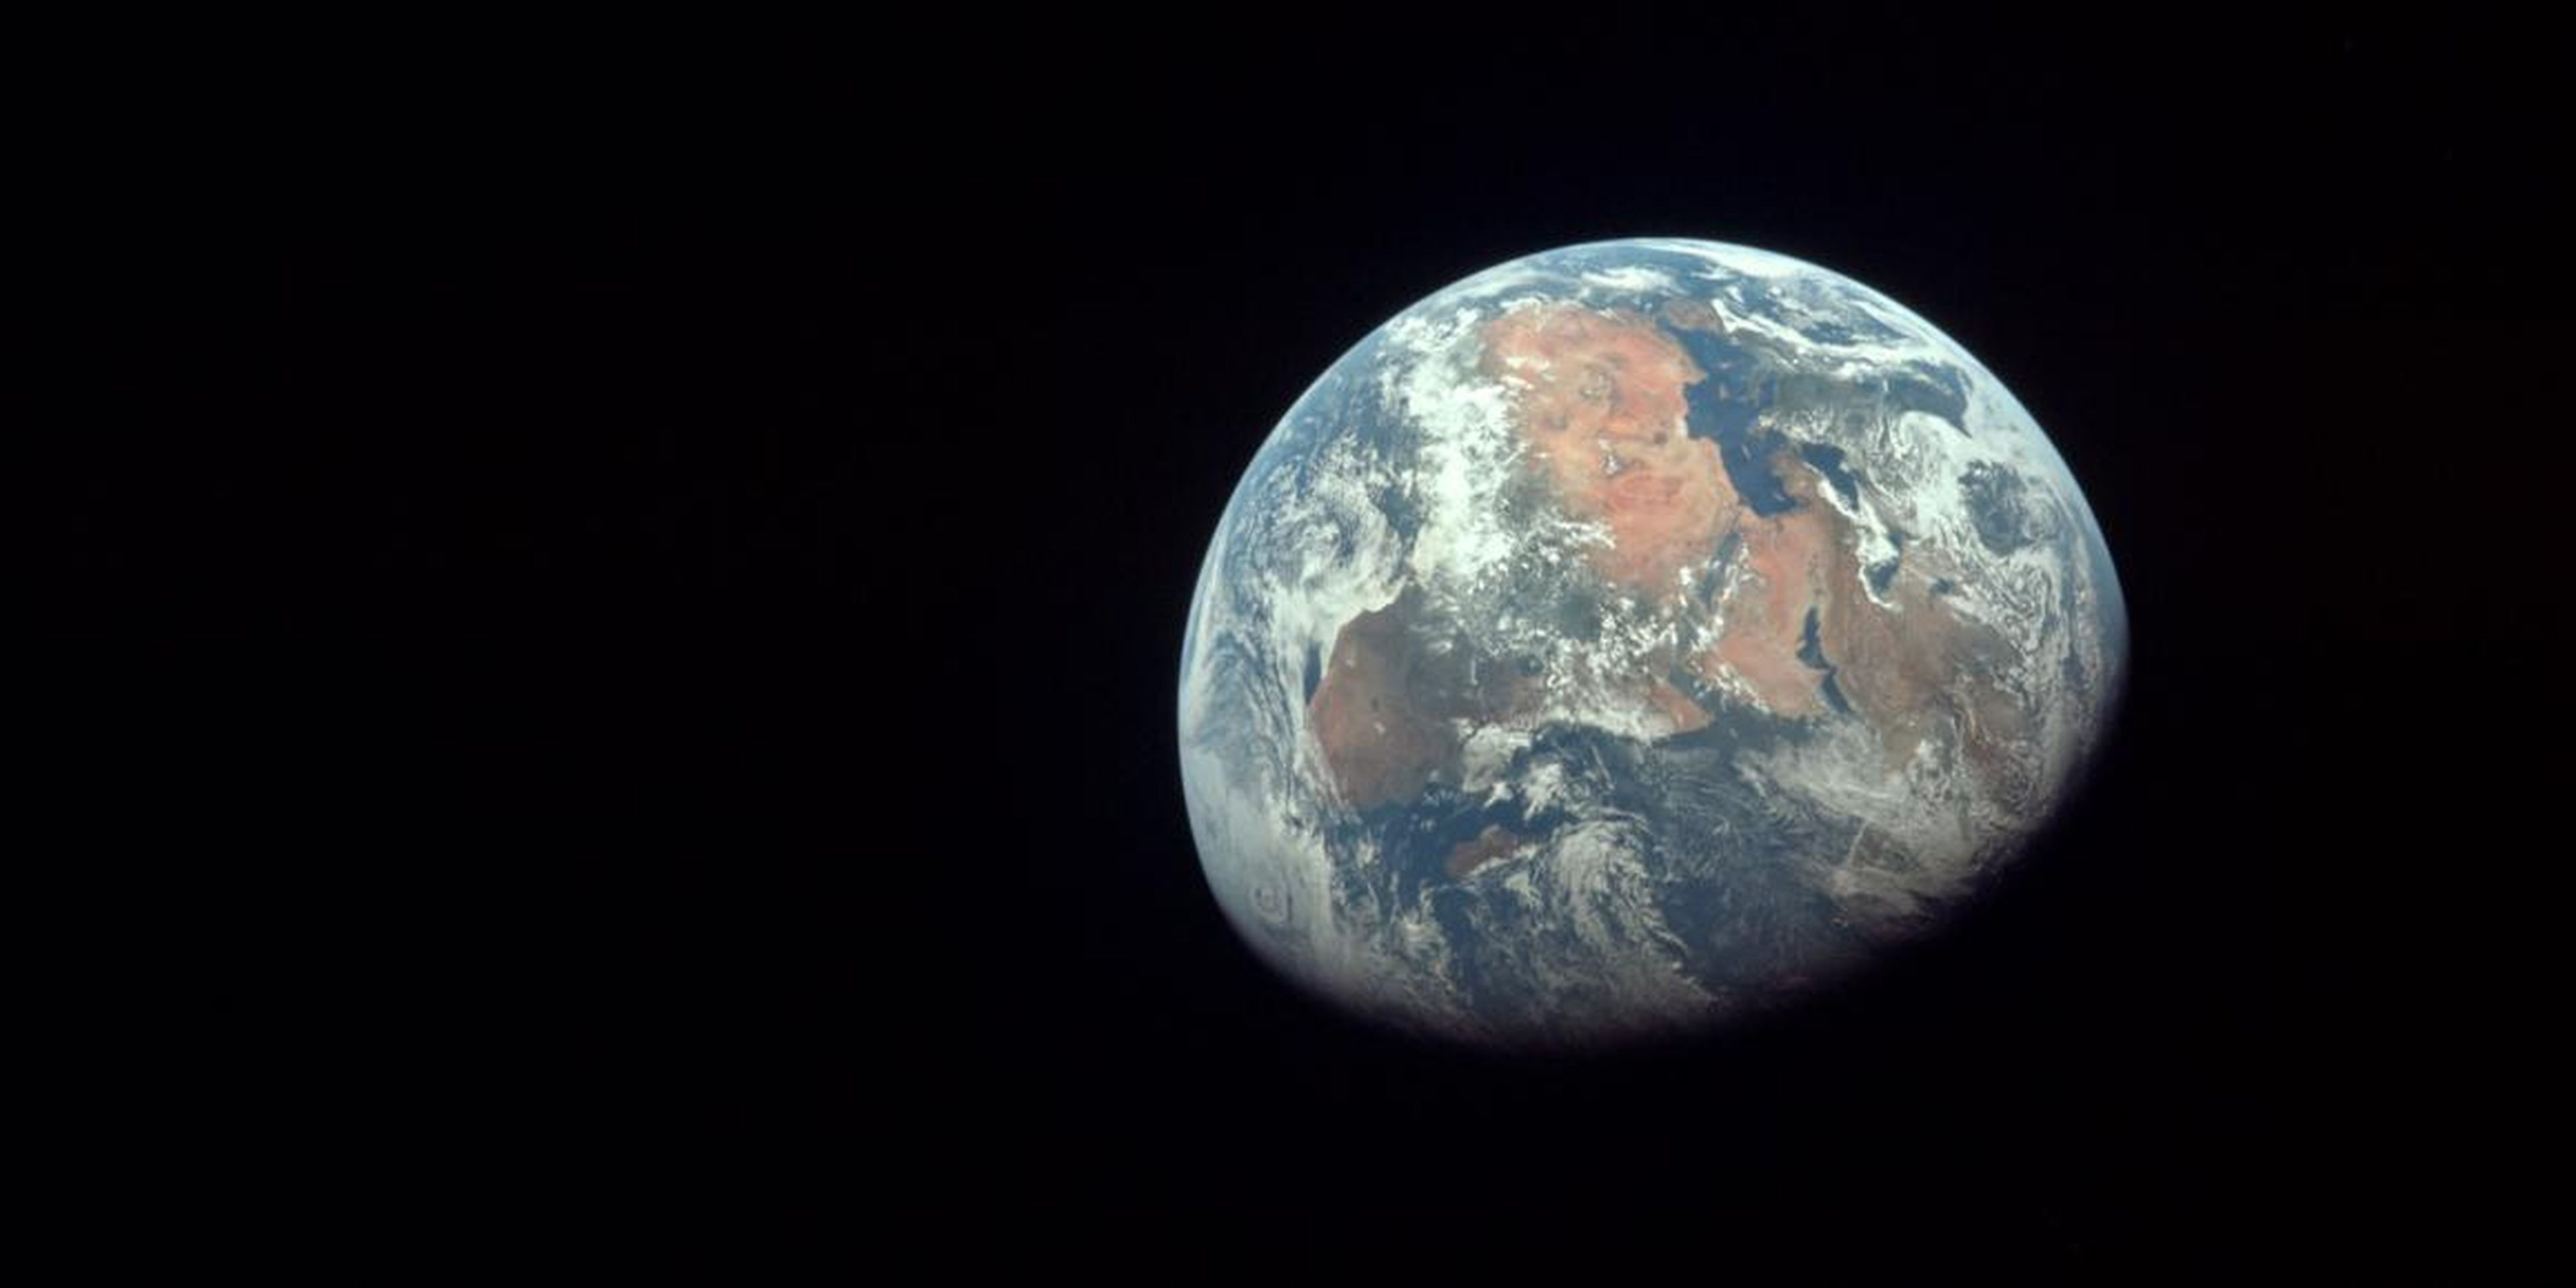 Apollo 11 astronauts took this photo of Earth on July 20, 1969.